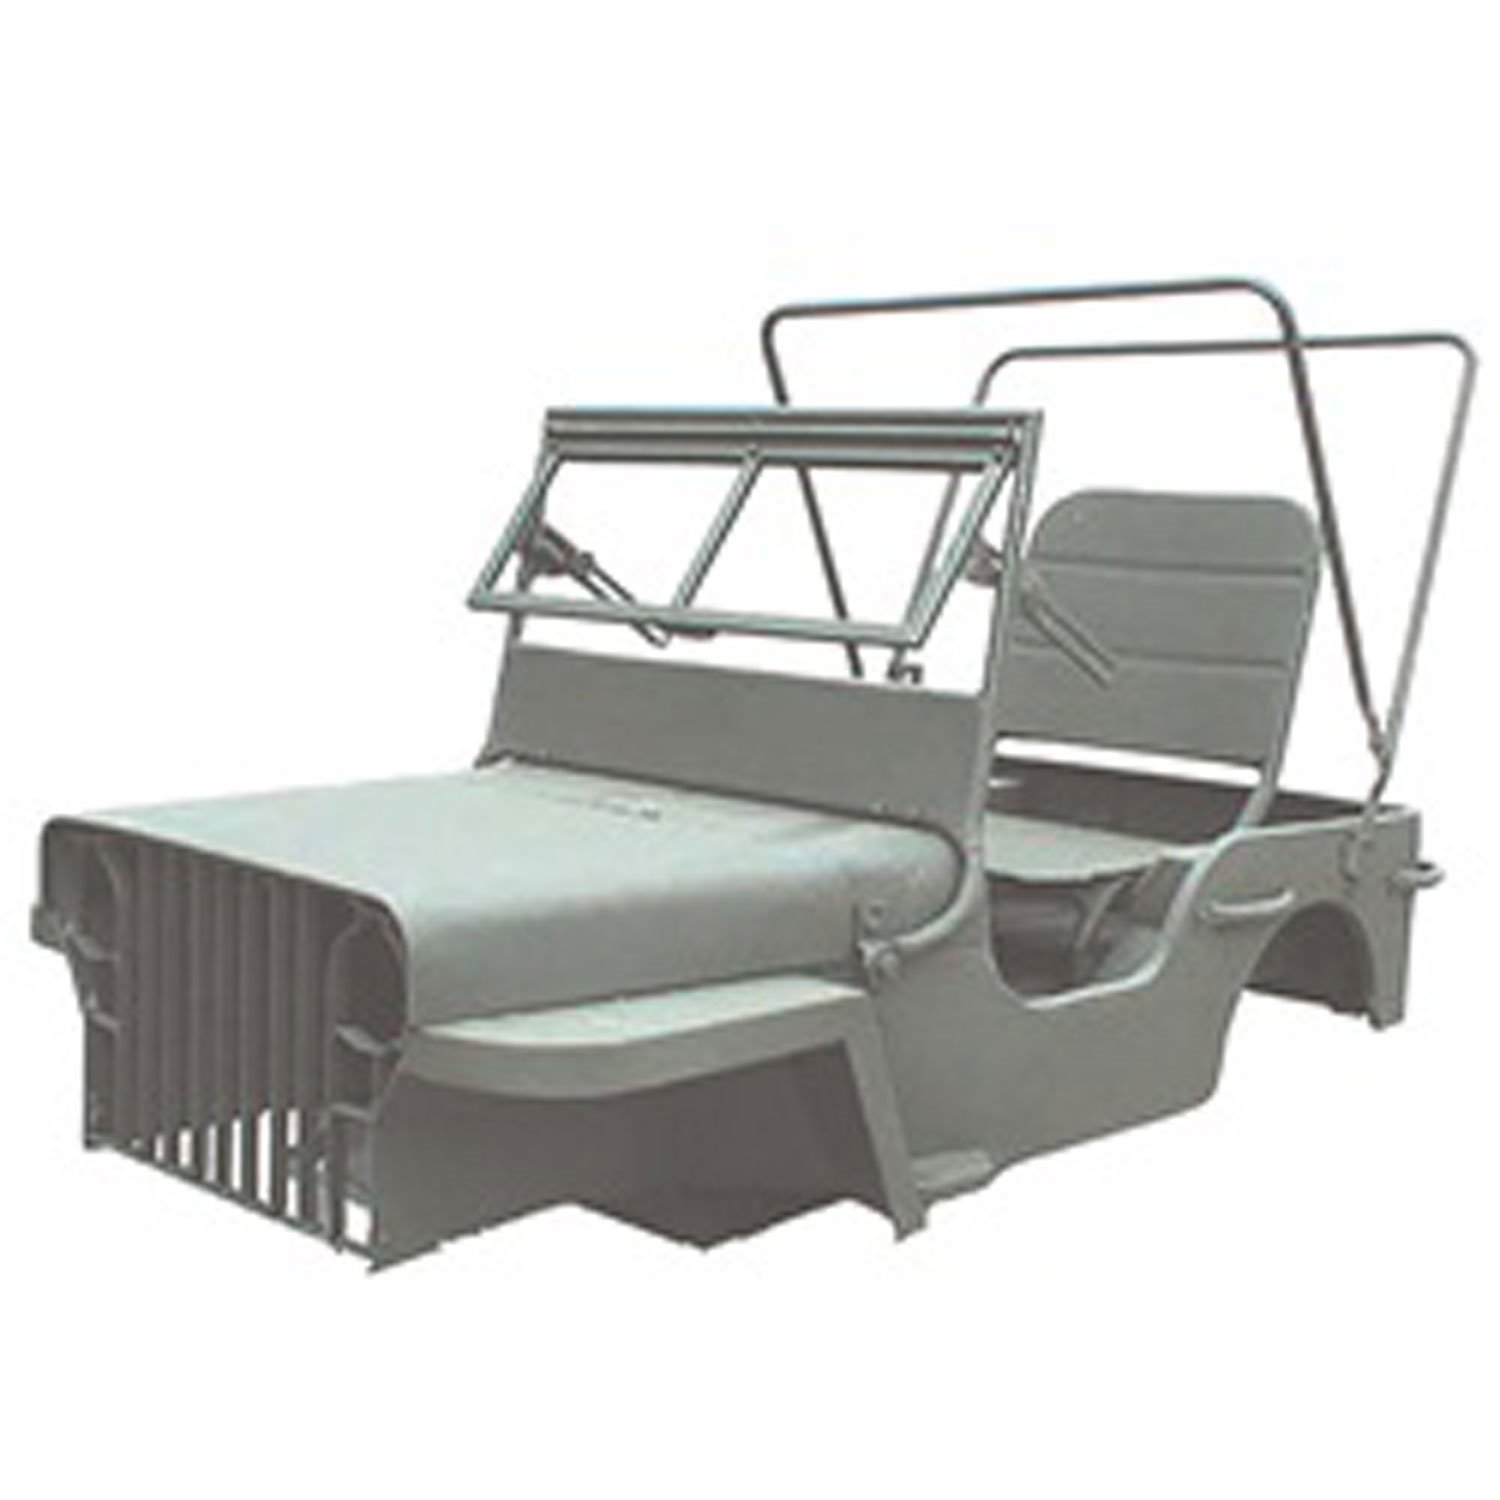 Mini MB Body Kit for Use with ATV